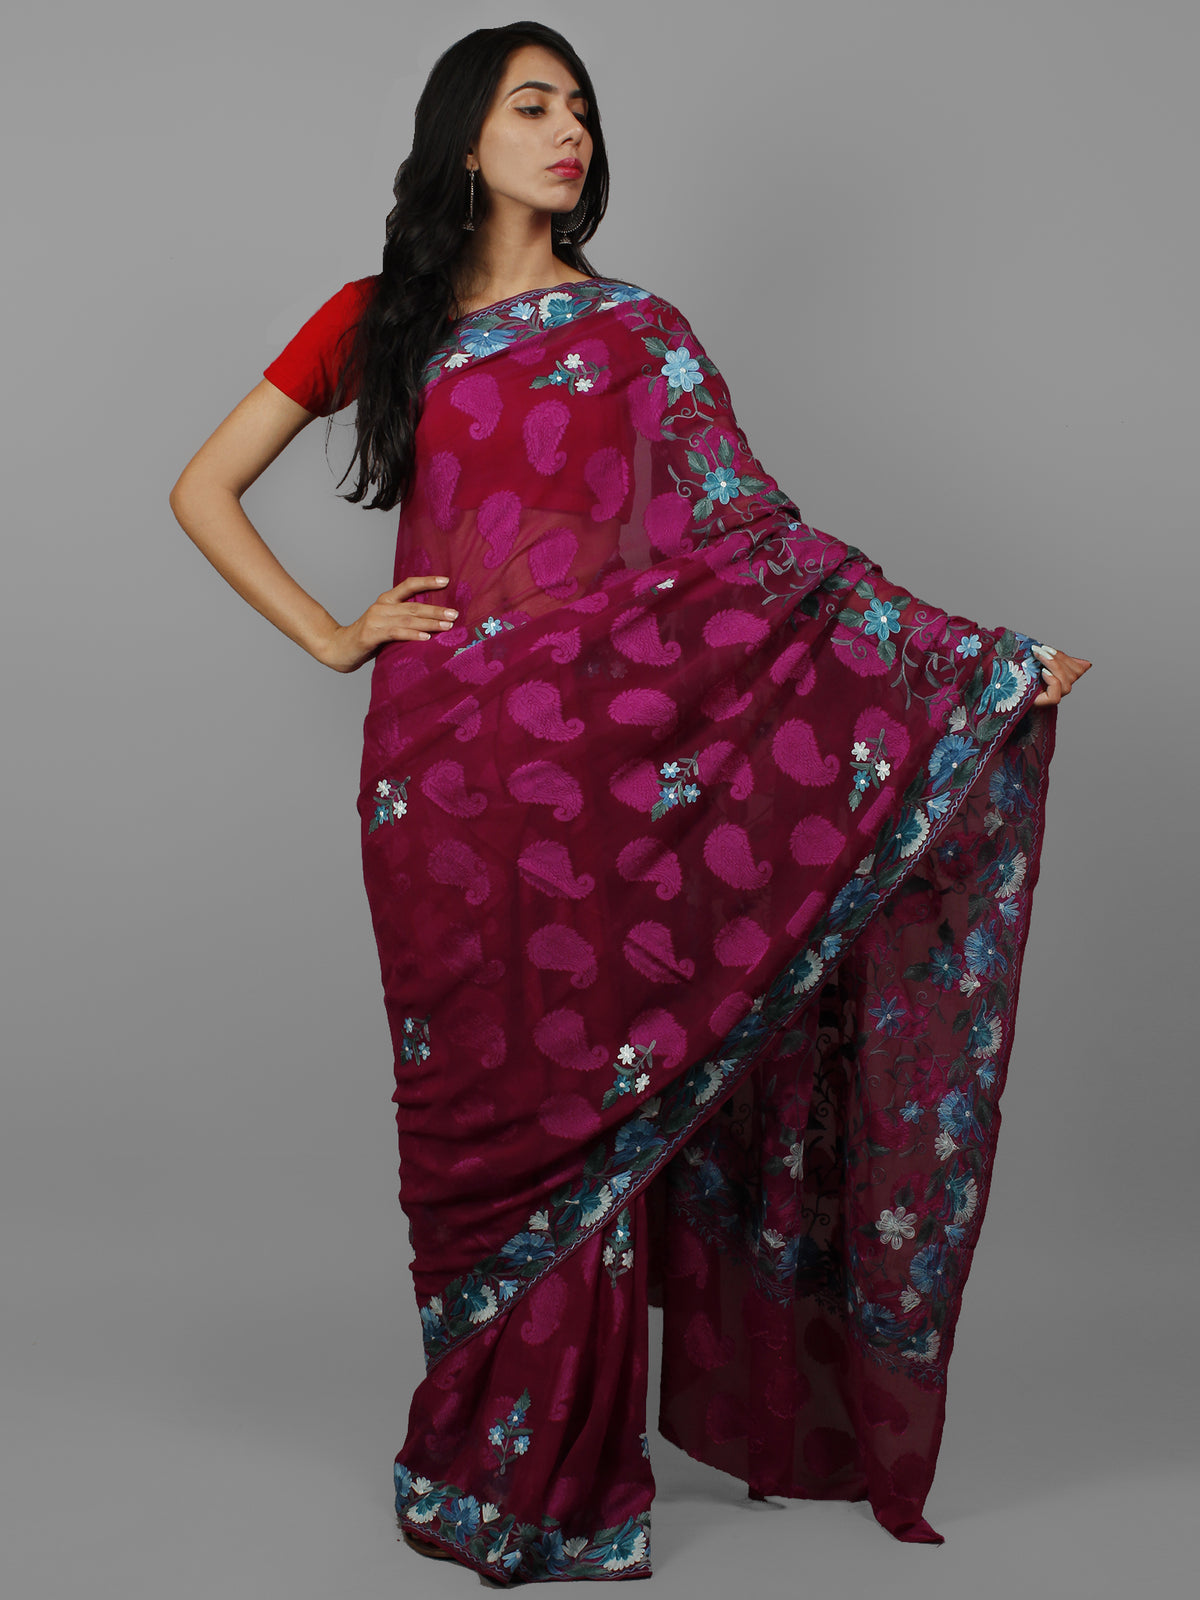 Maroon Purple Teal Blue Ivory Aari Embroidered Chiffon Saree With Paisley Self From Kashmir  - S031702143